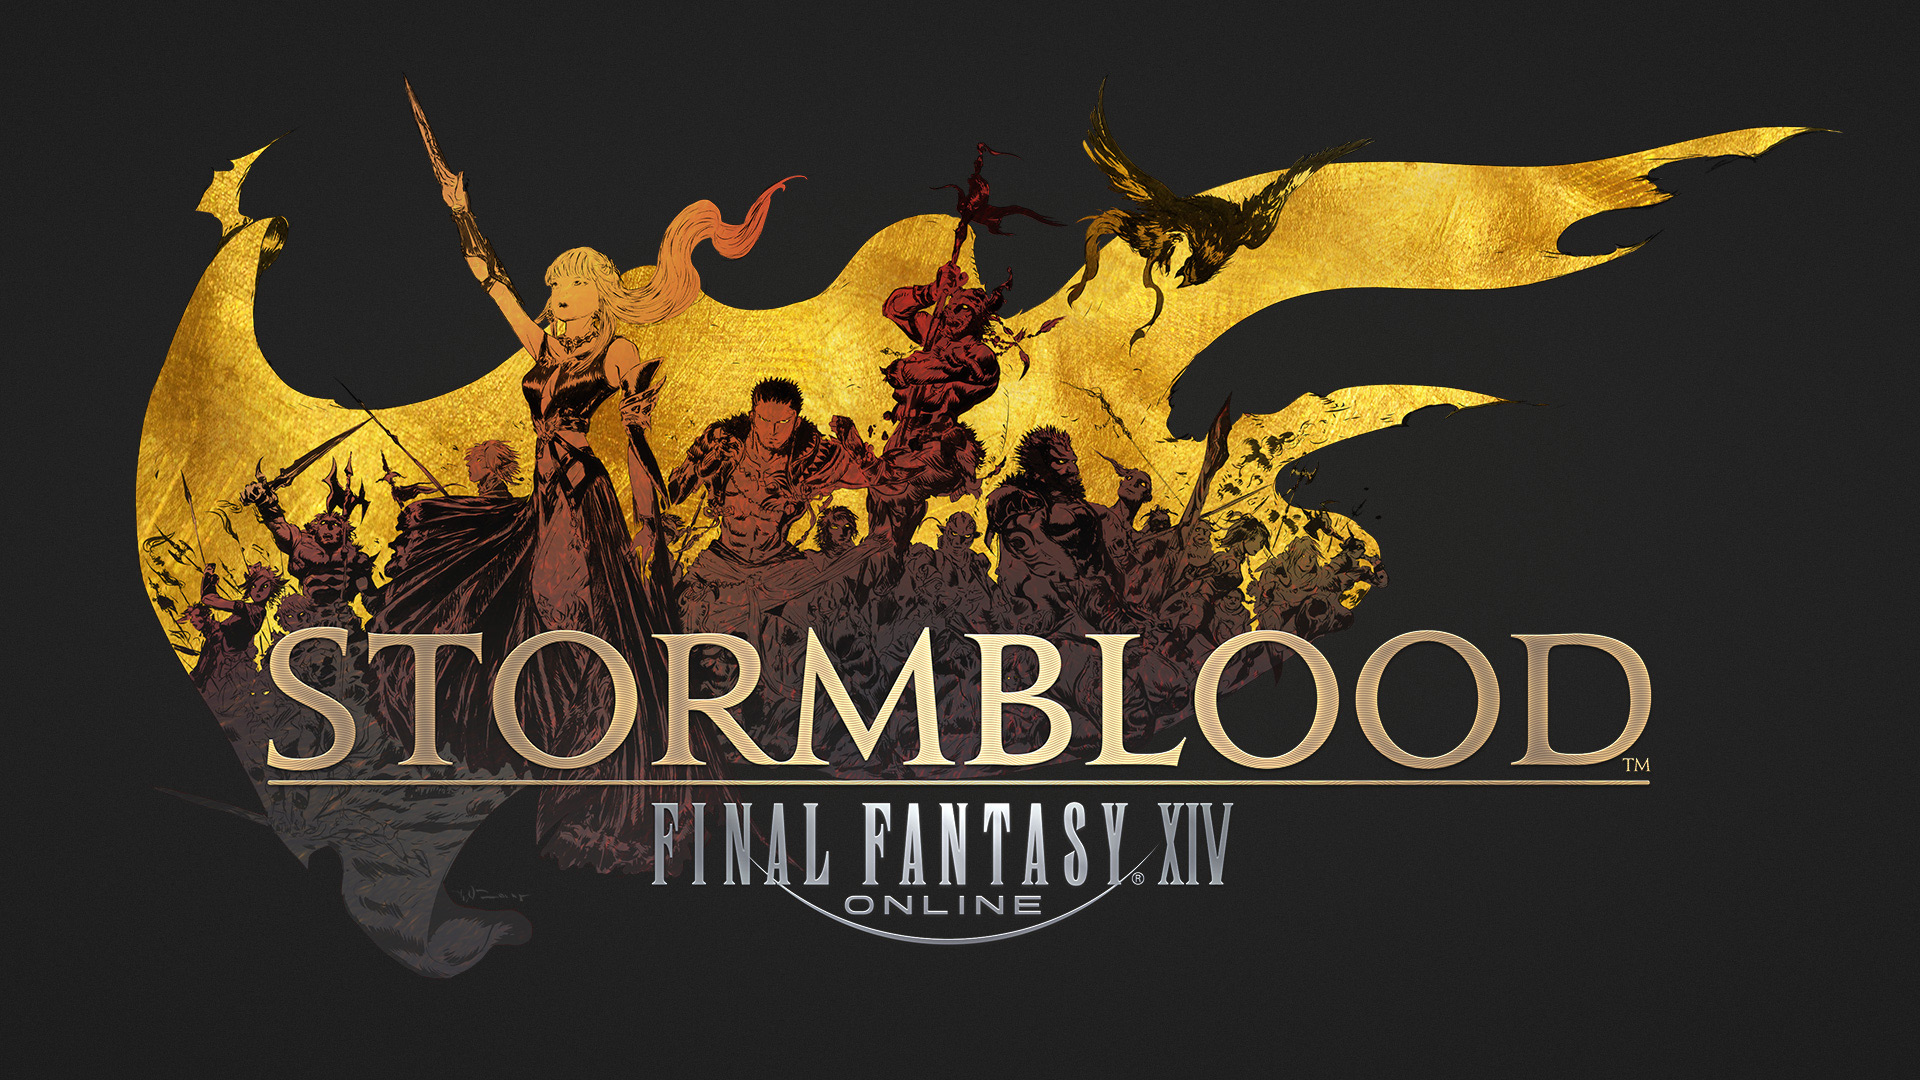 FFXIV's Stormblood Expansion is Free for a Limited Time